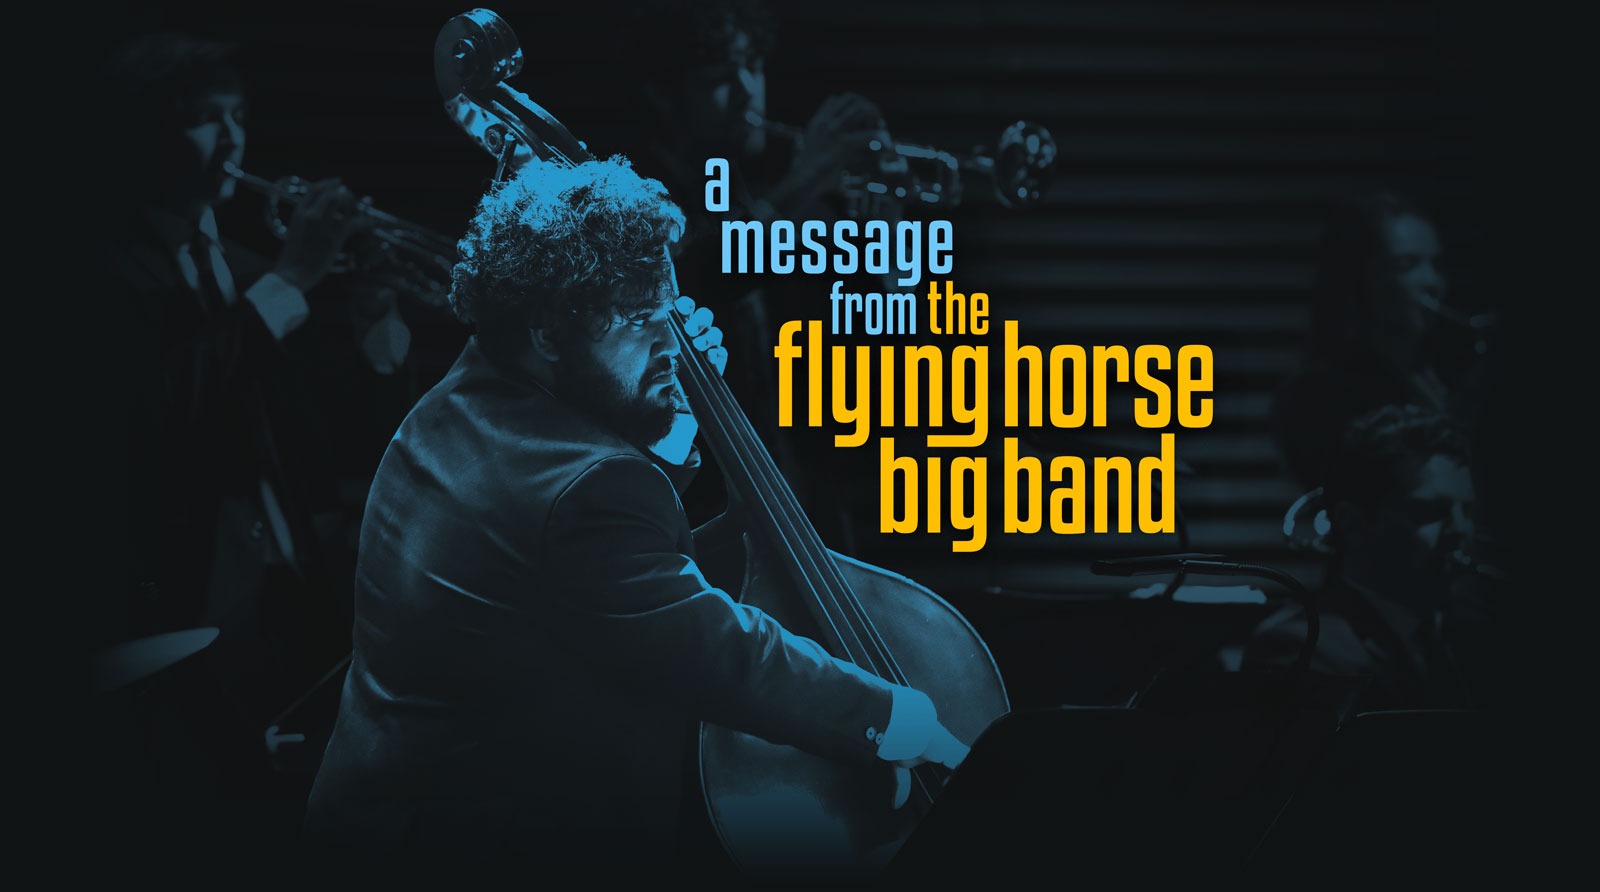 Bass player with text 'a message from the flying horse big band''